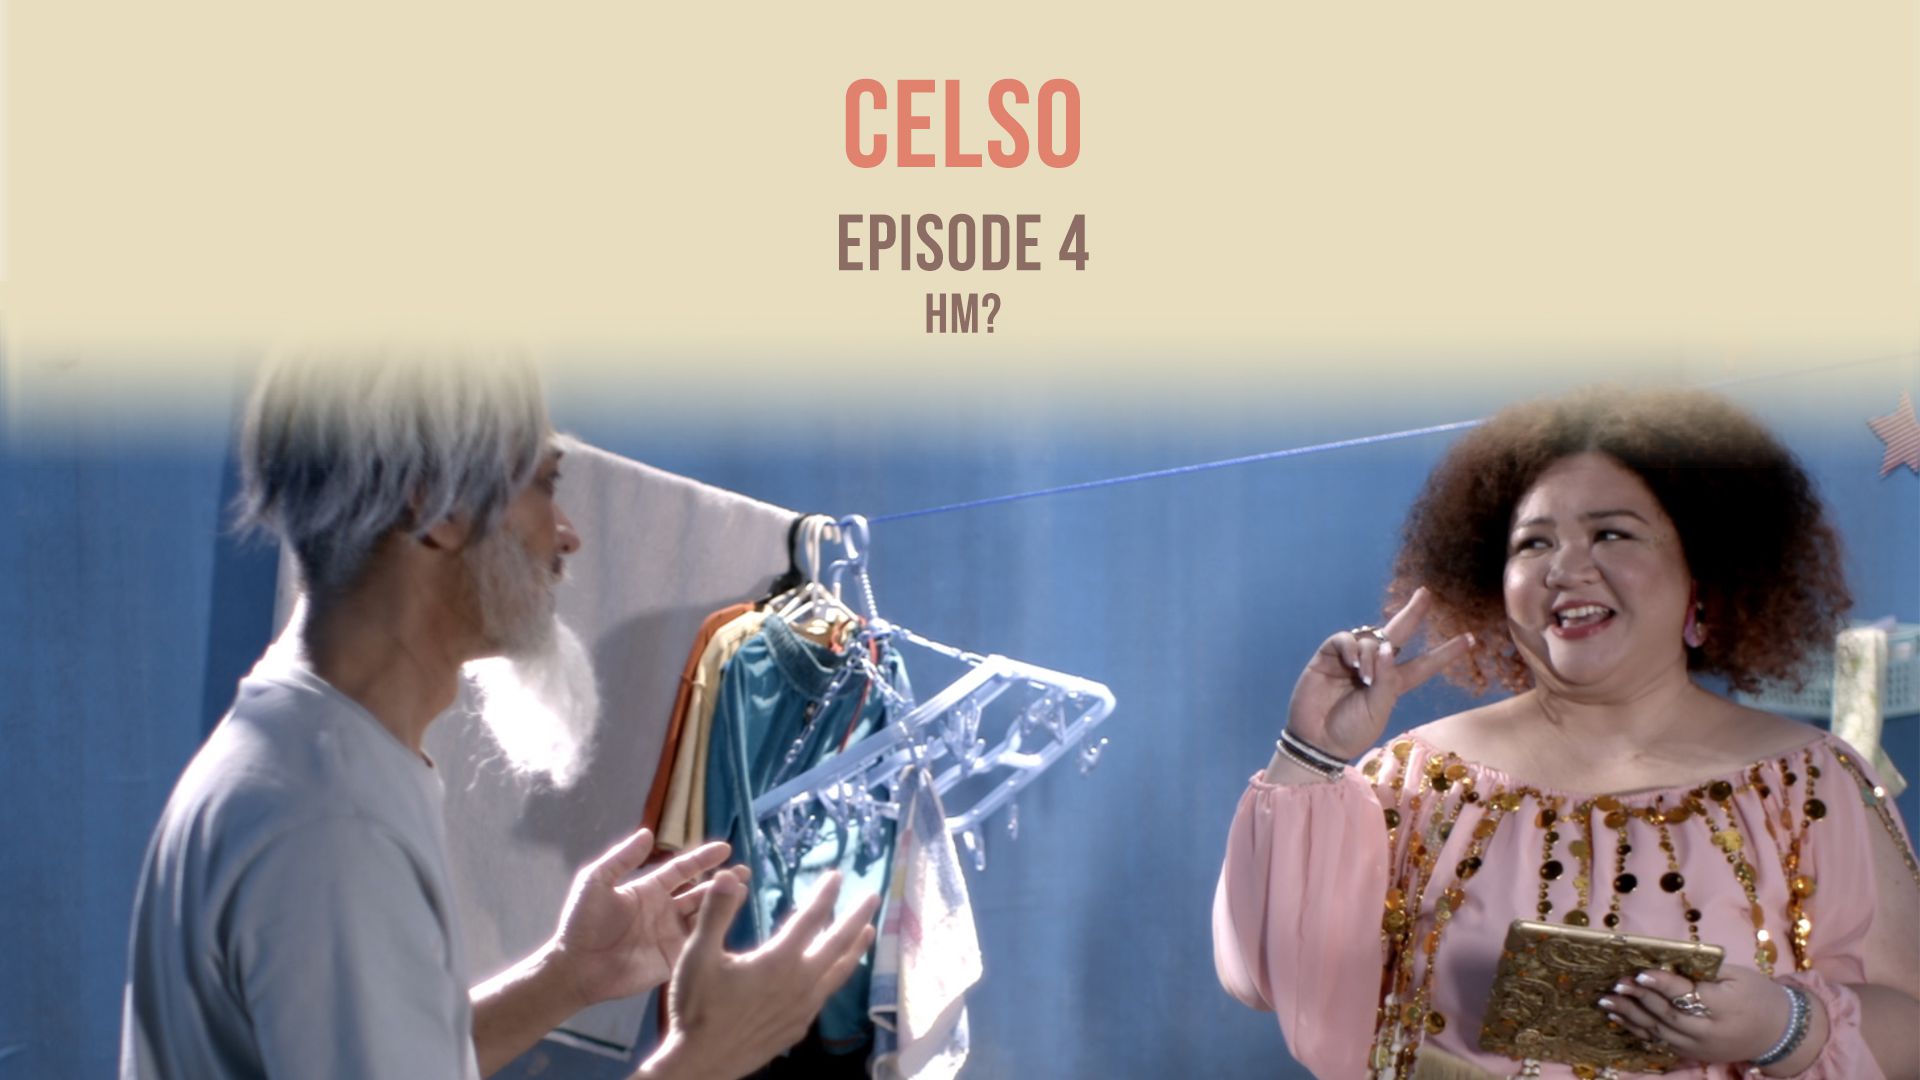 CELSO Episode 4